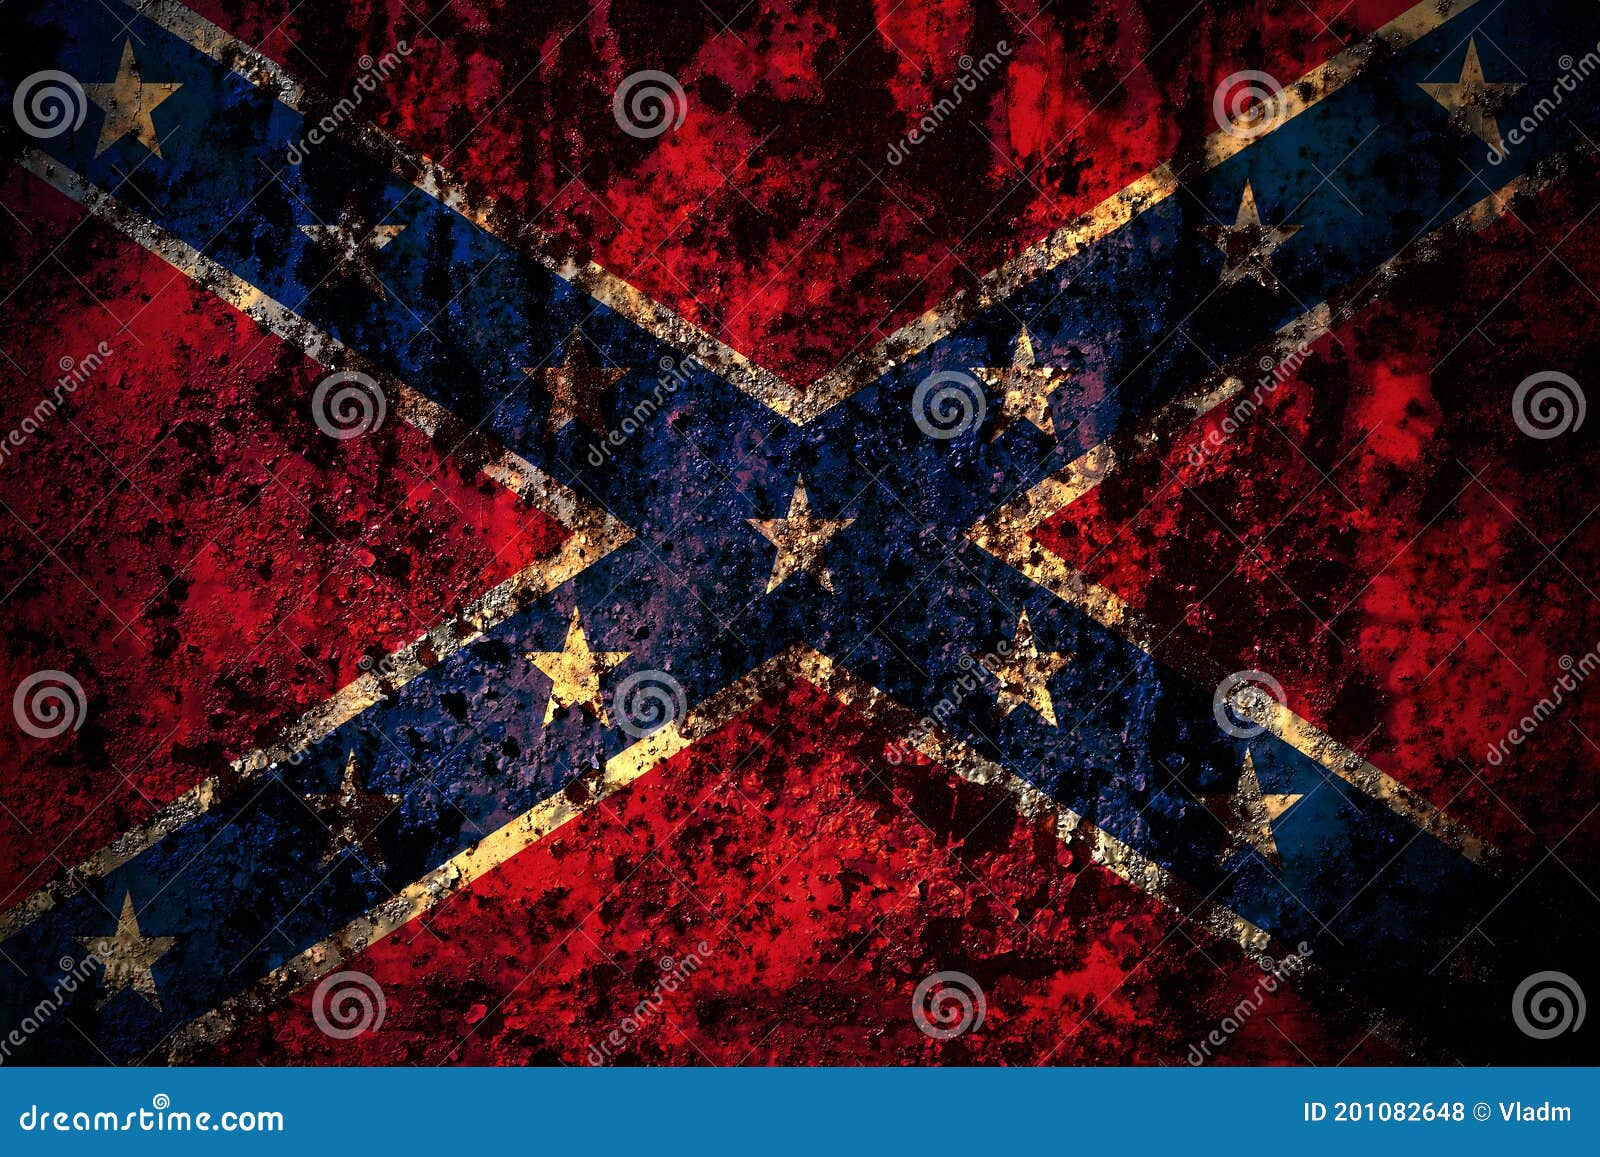 united states of america, america, us, usa, american, confederate navy jack flag on grunge metal background texture with scratches